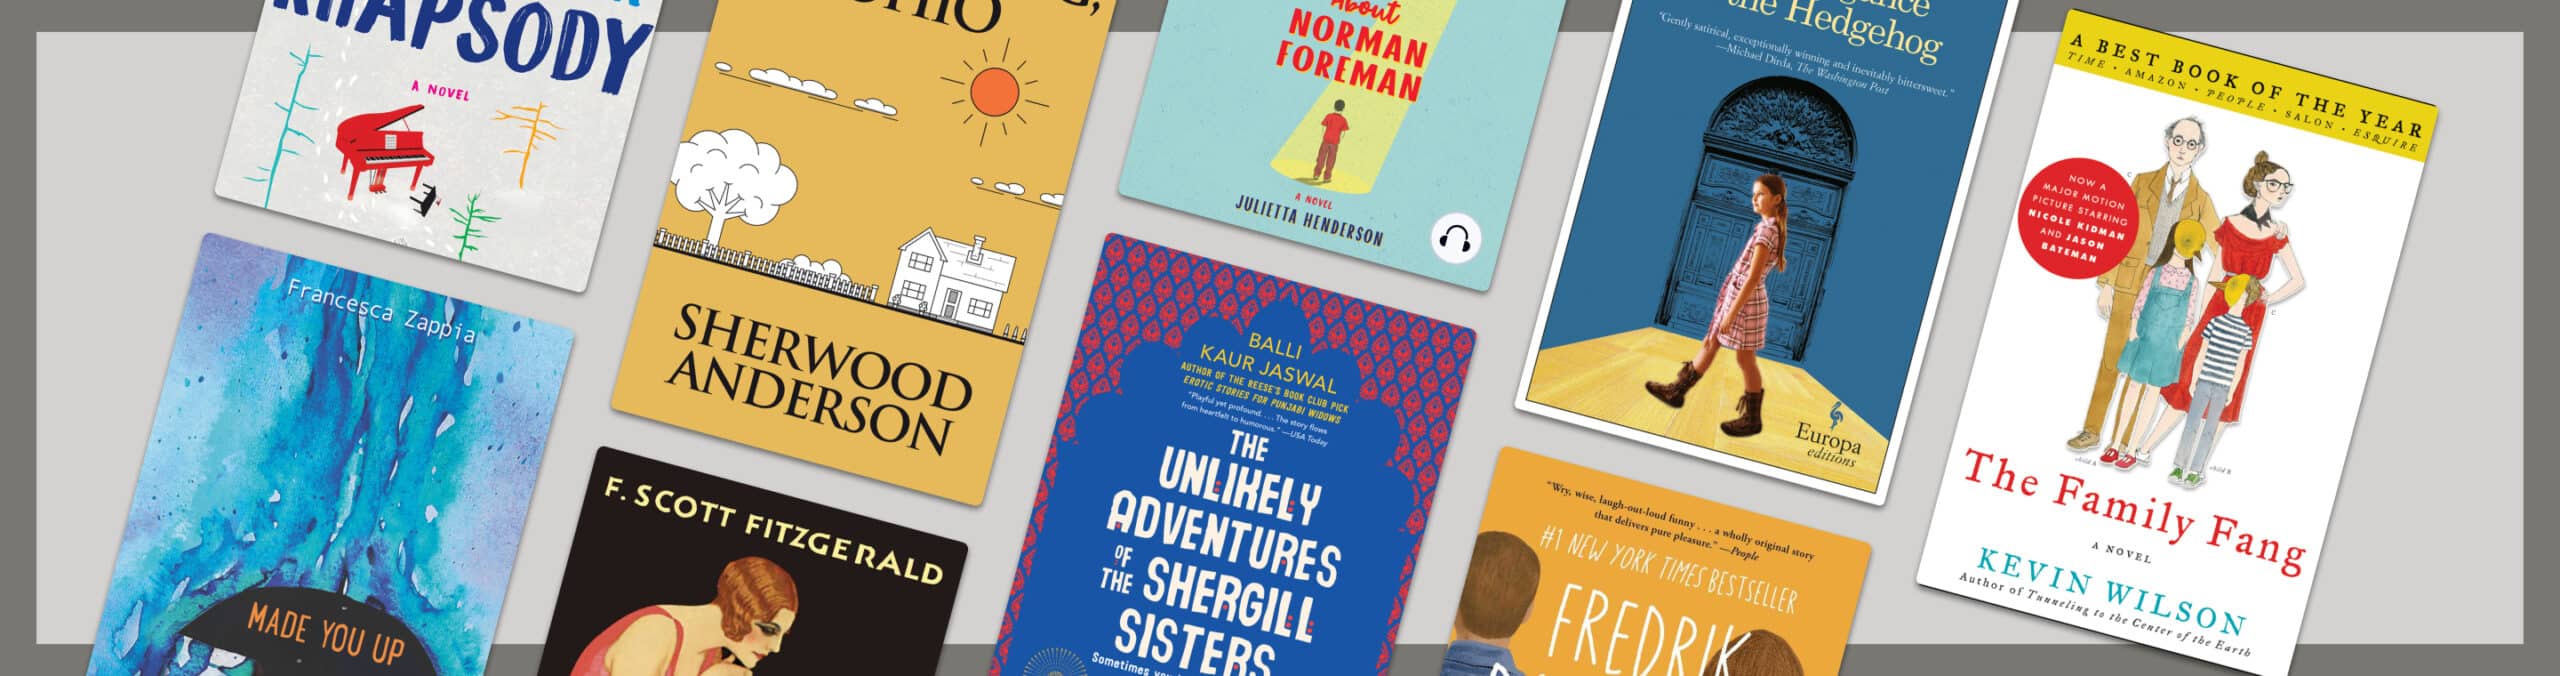 13 enchanting books that read like Wes Anderson movies